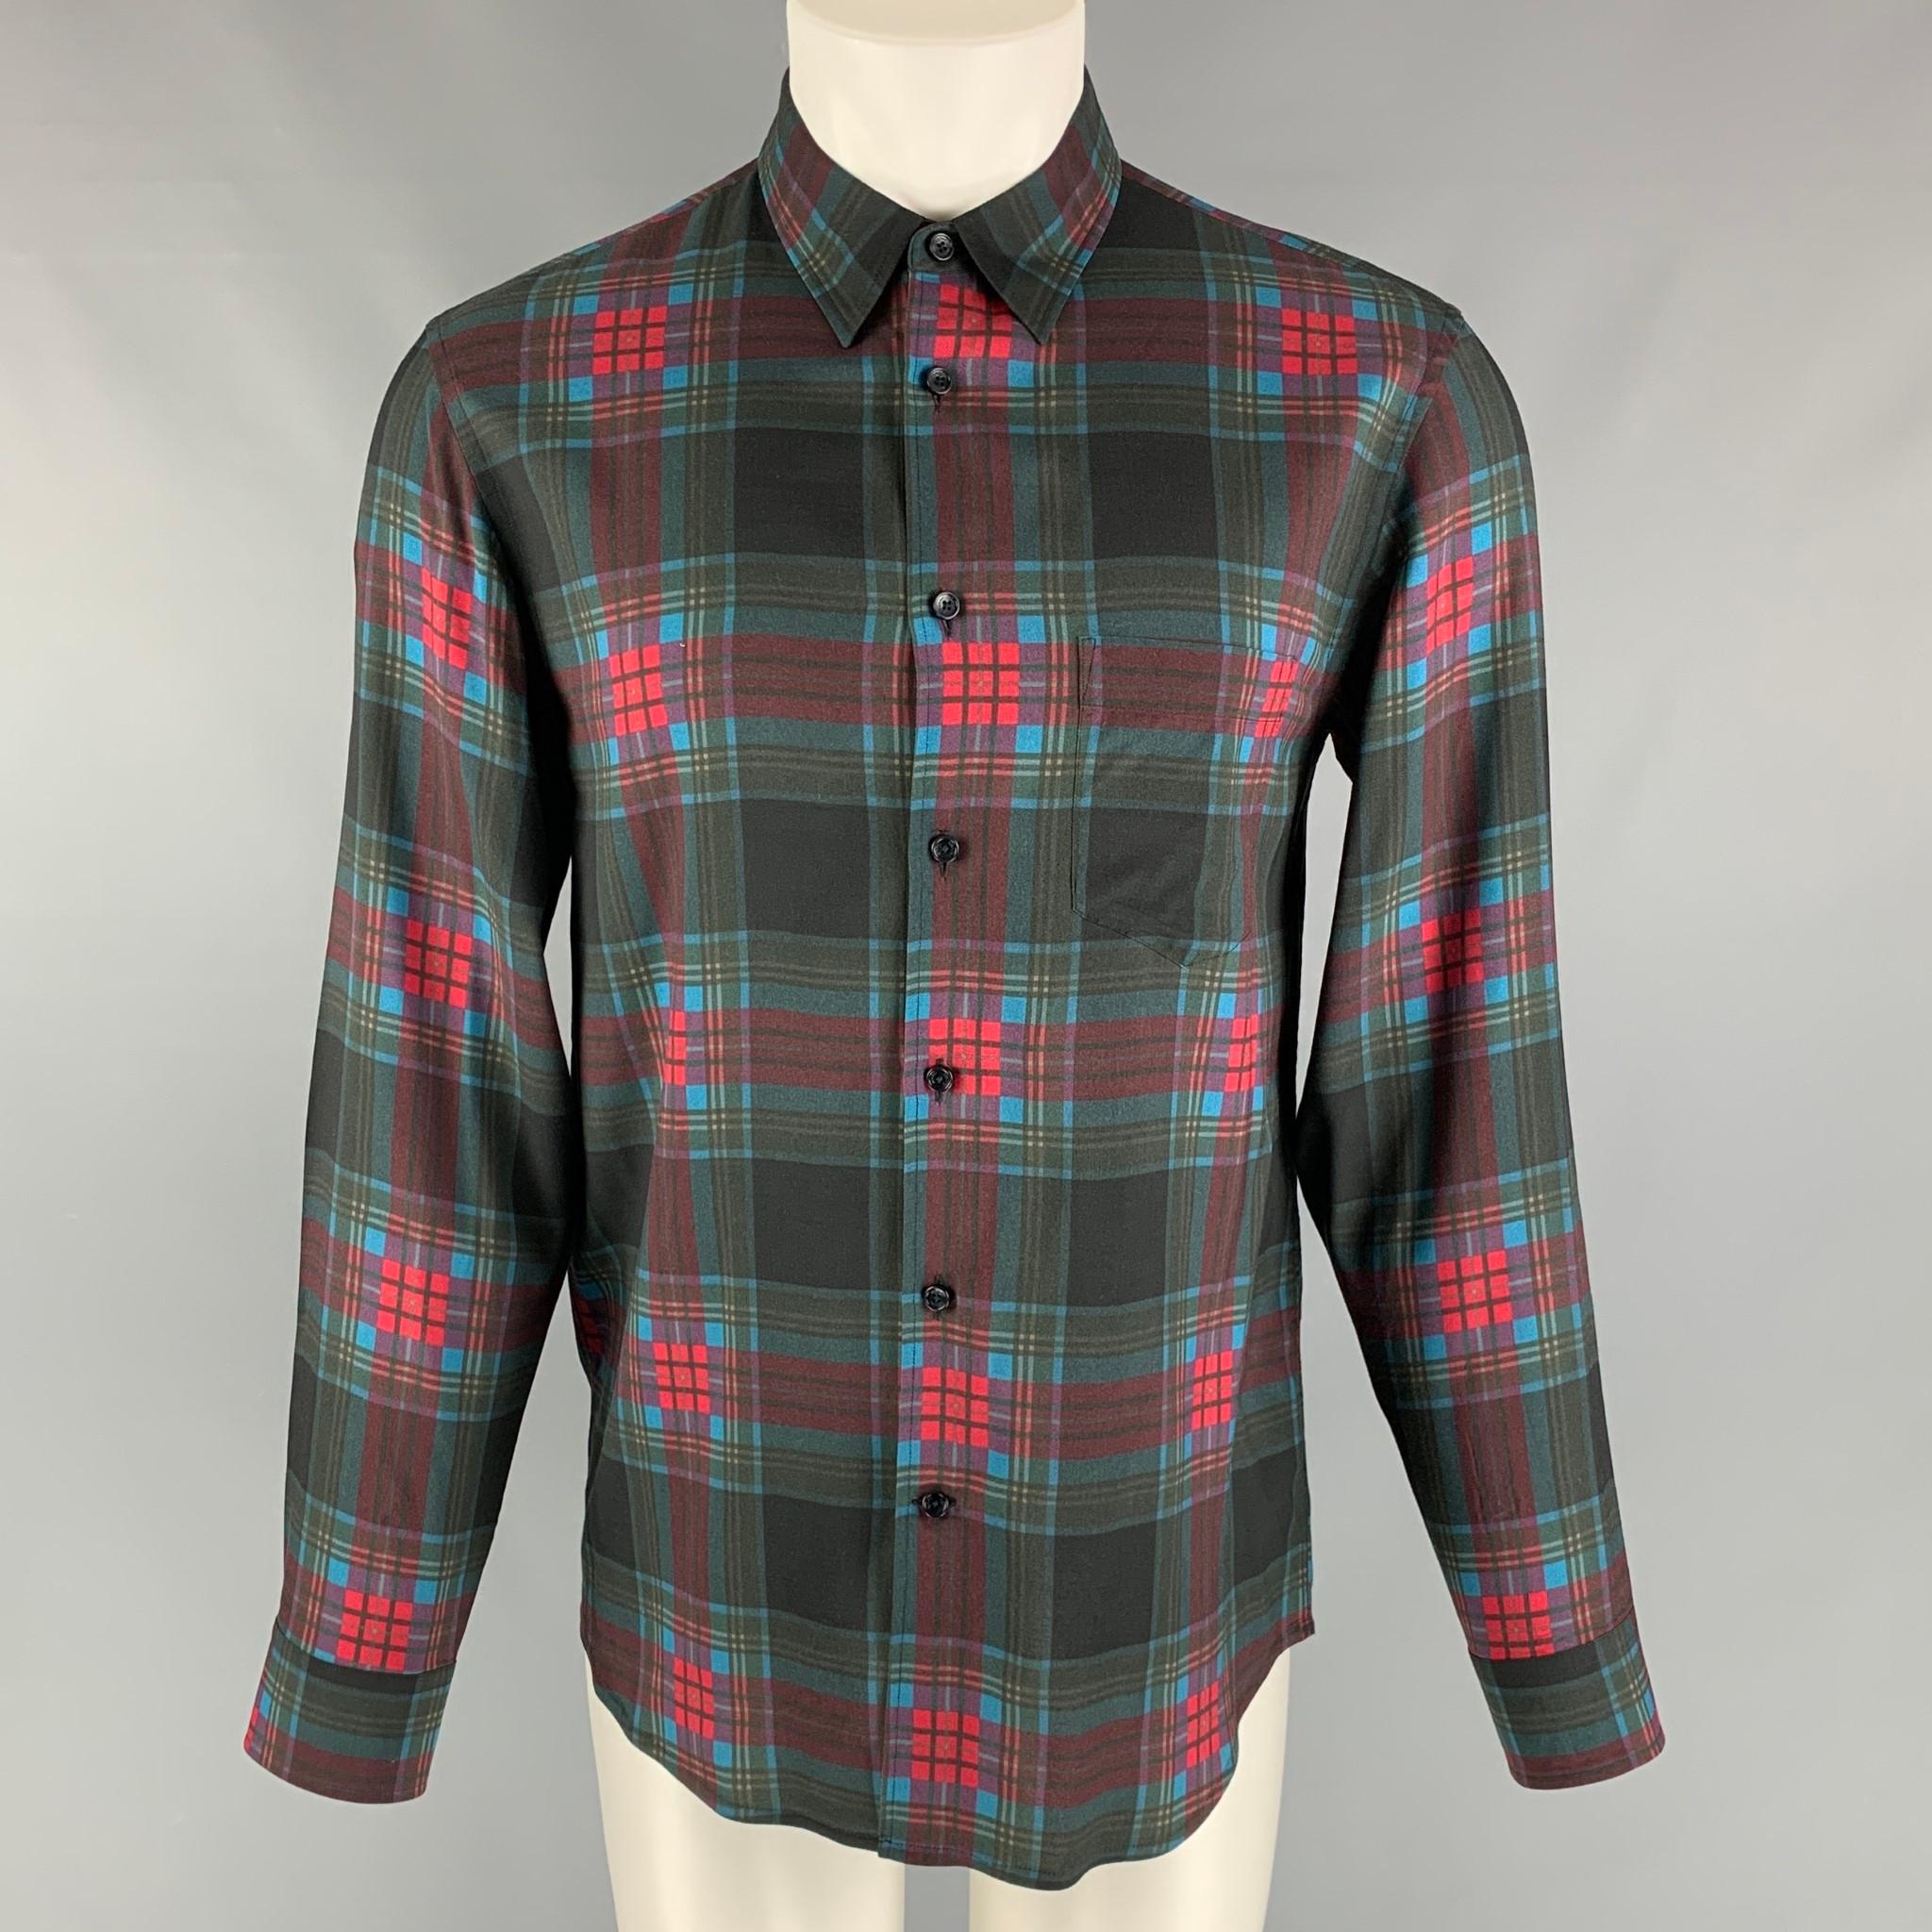 MARC JACOBS long sleeve shirt comes in black multi-color plaid viscose featuring a straight collar, frontal pocket, and buttons closure. Made in Italy.
 
Excellent Pre-Owned Condition.
Marked: 48

Measurements:

Shoulder: 18 in.
Chest: 41